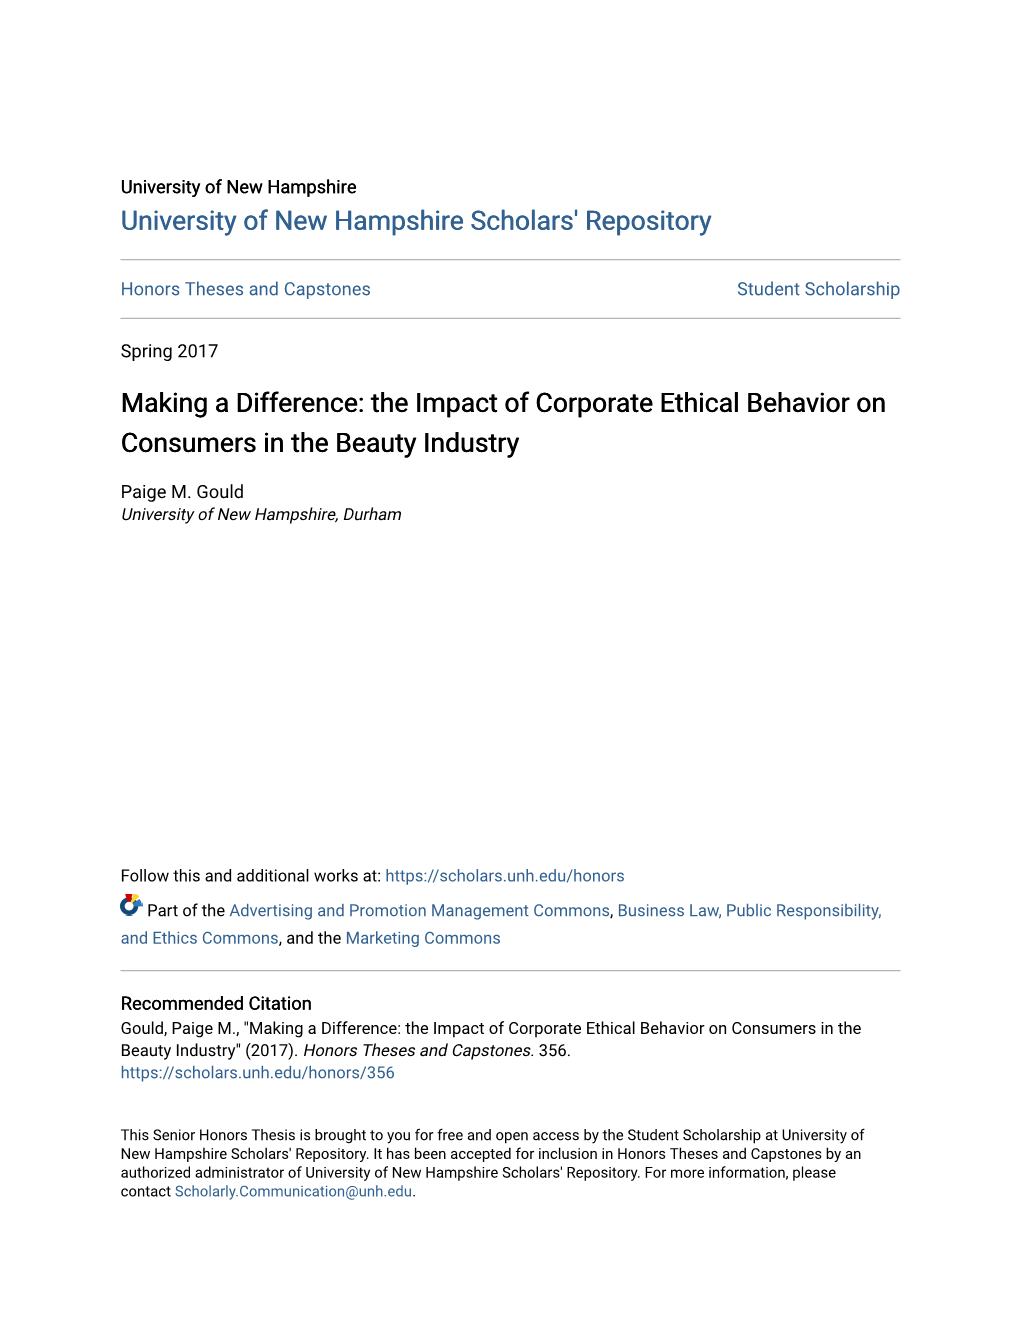 The Impact of Corporate Ethical Behavior on Consumers in the Beauty Industry